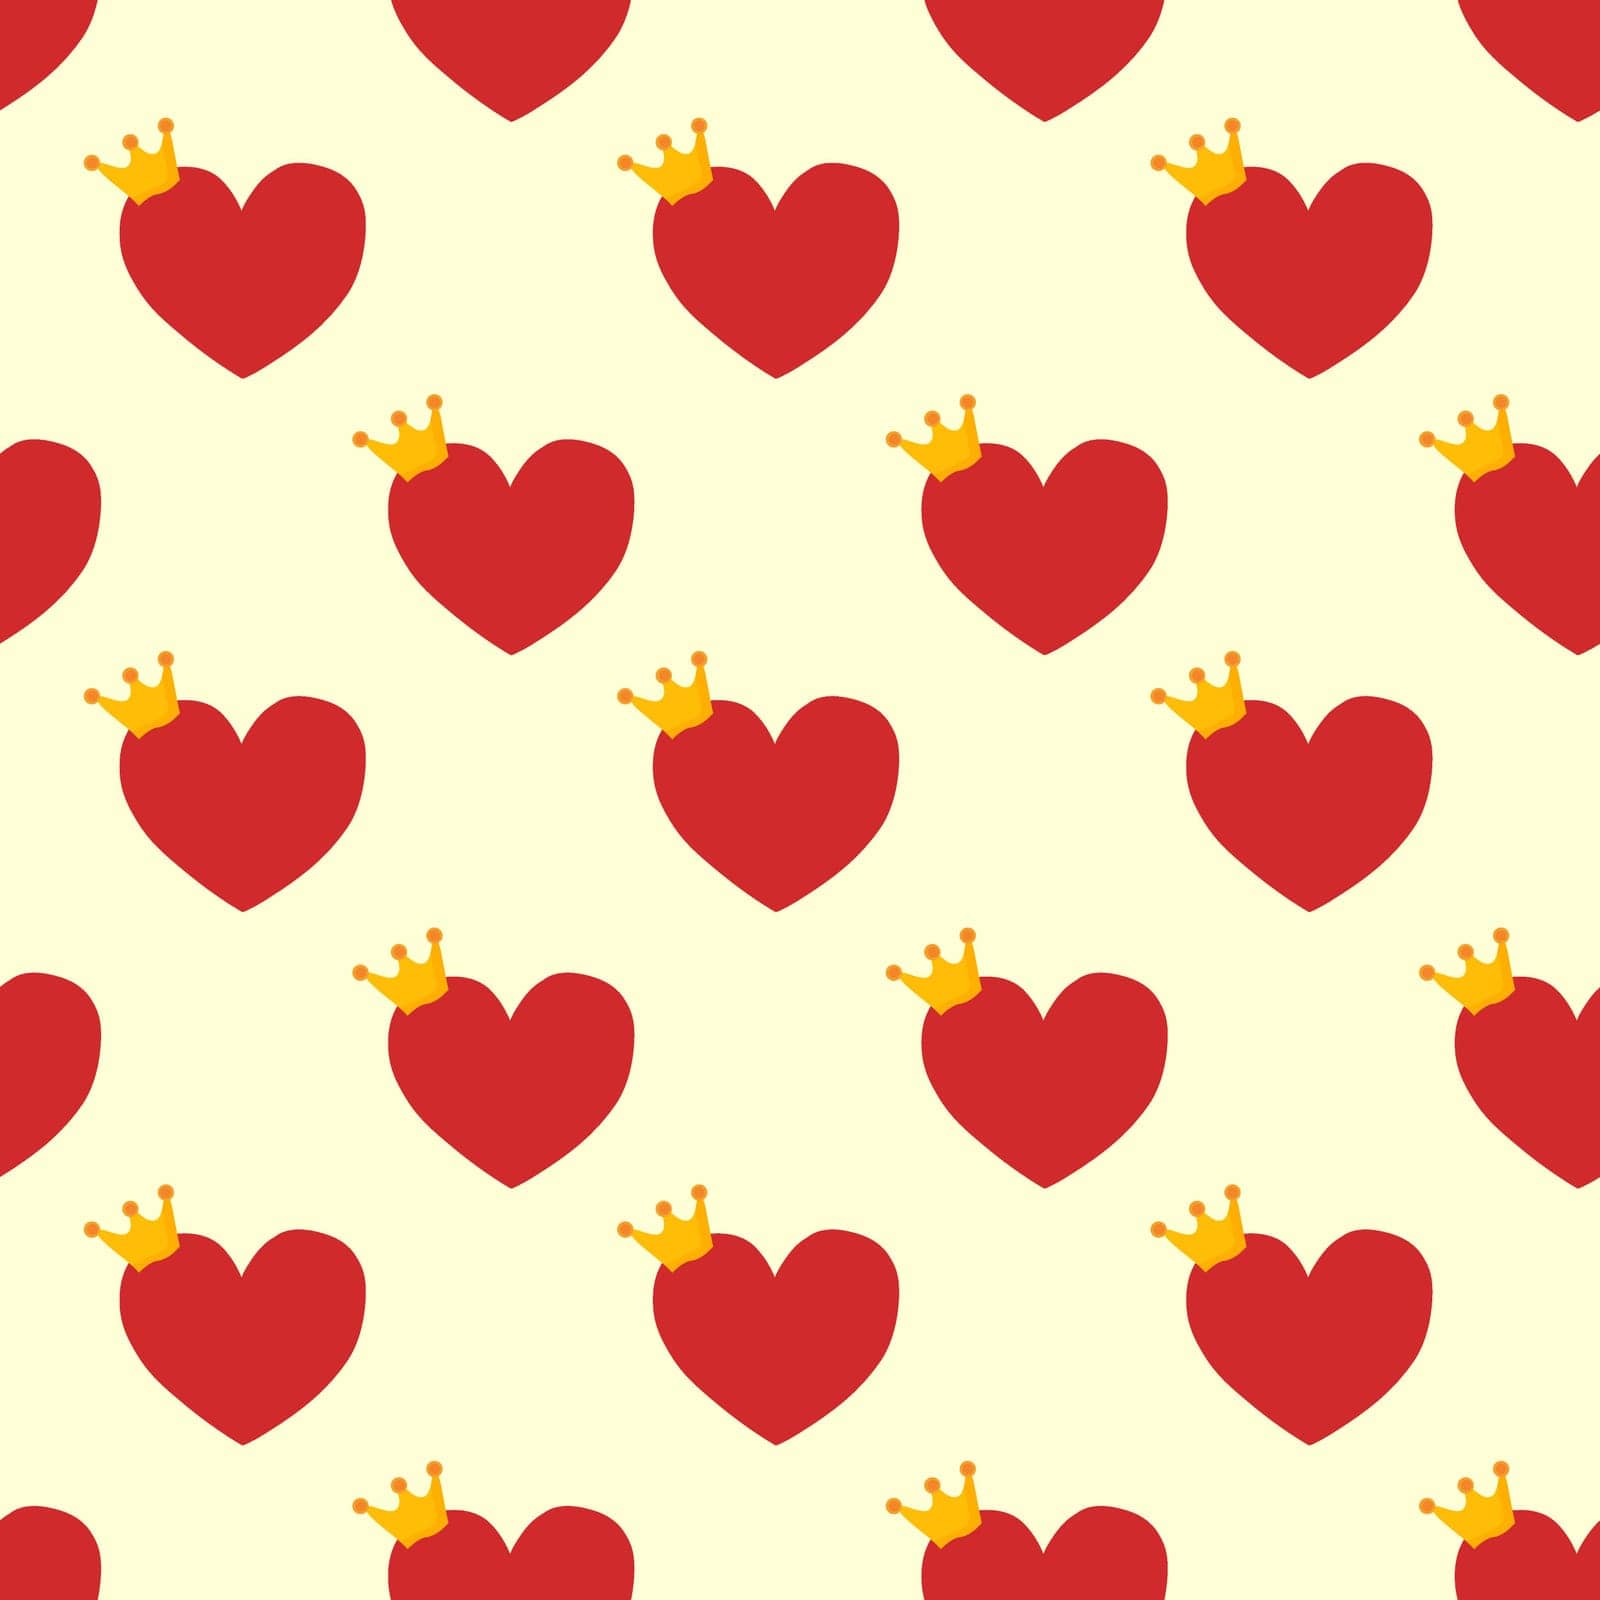 Repeated Red Hearts with crowns drawn by hand. Cute seamless pattern for girls. Sketch, doodle, scribble. Endless girlish print. Girly flat vector illustration.